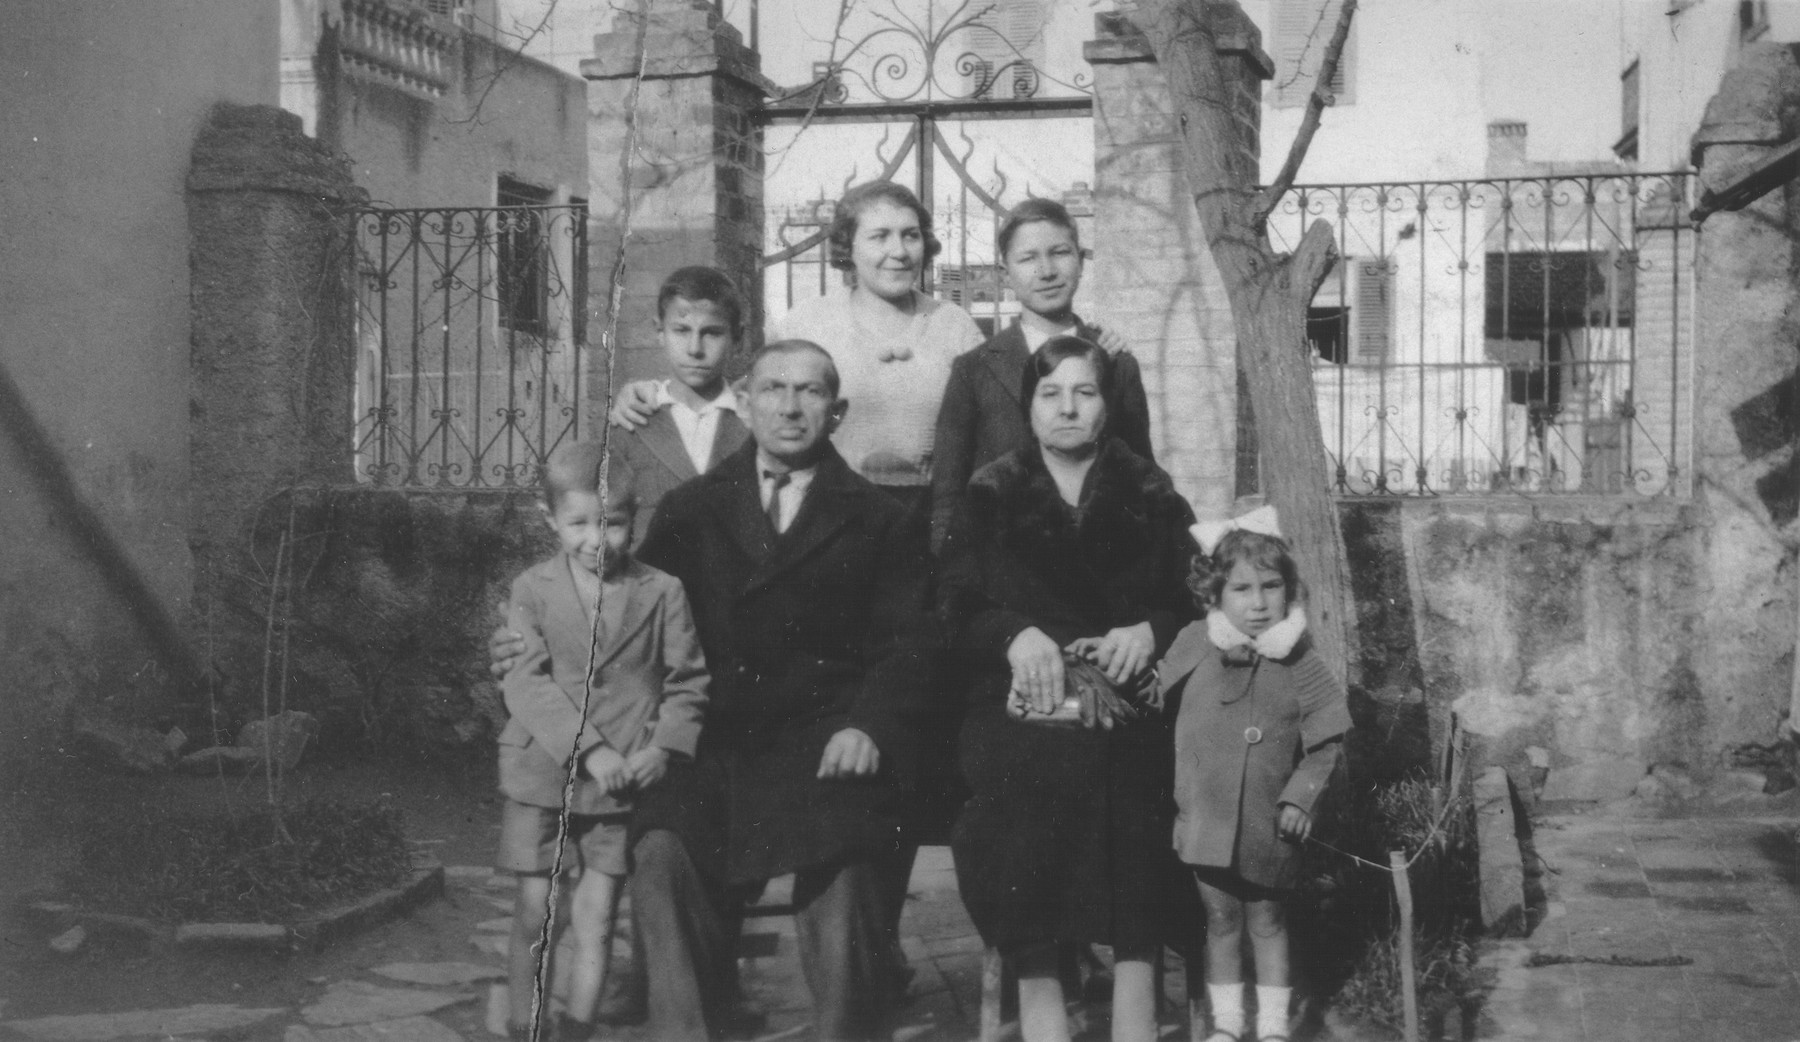 Portrait of the Beraha family in the courtyard of their home in Salonika.  

Pictured are Eliahu and Sol Beraha (center) and their children: Yeshua (left), Alberto (back row, left), Miriam (back row, center), Baruch (back row, right) and a niece named Estrea (lower right).